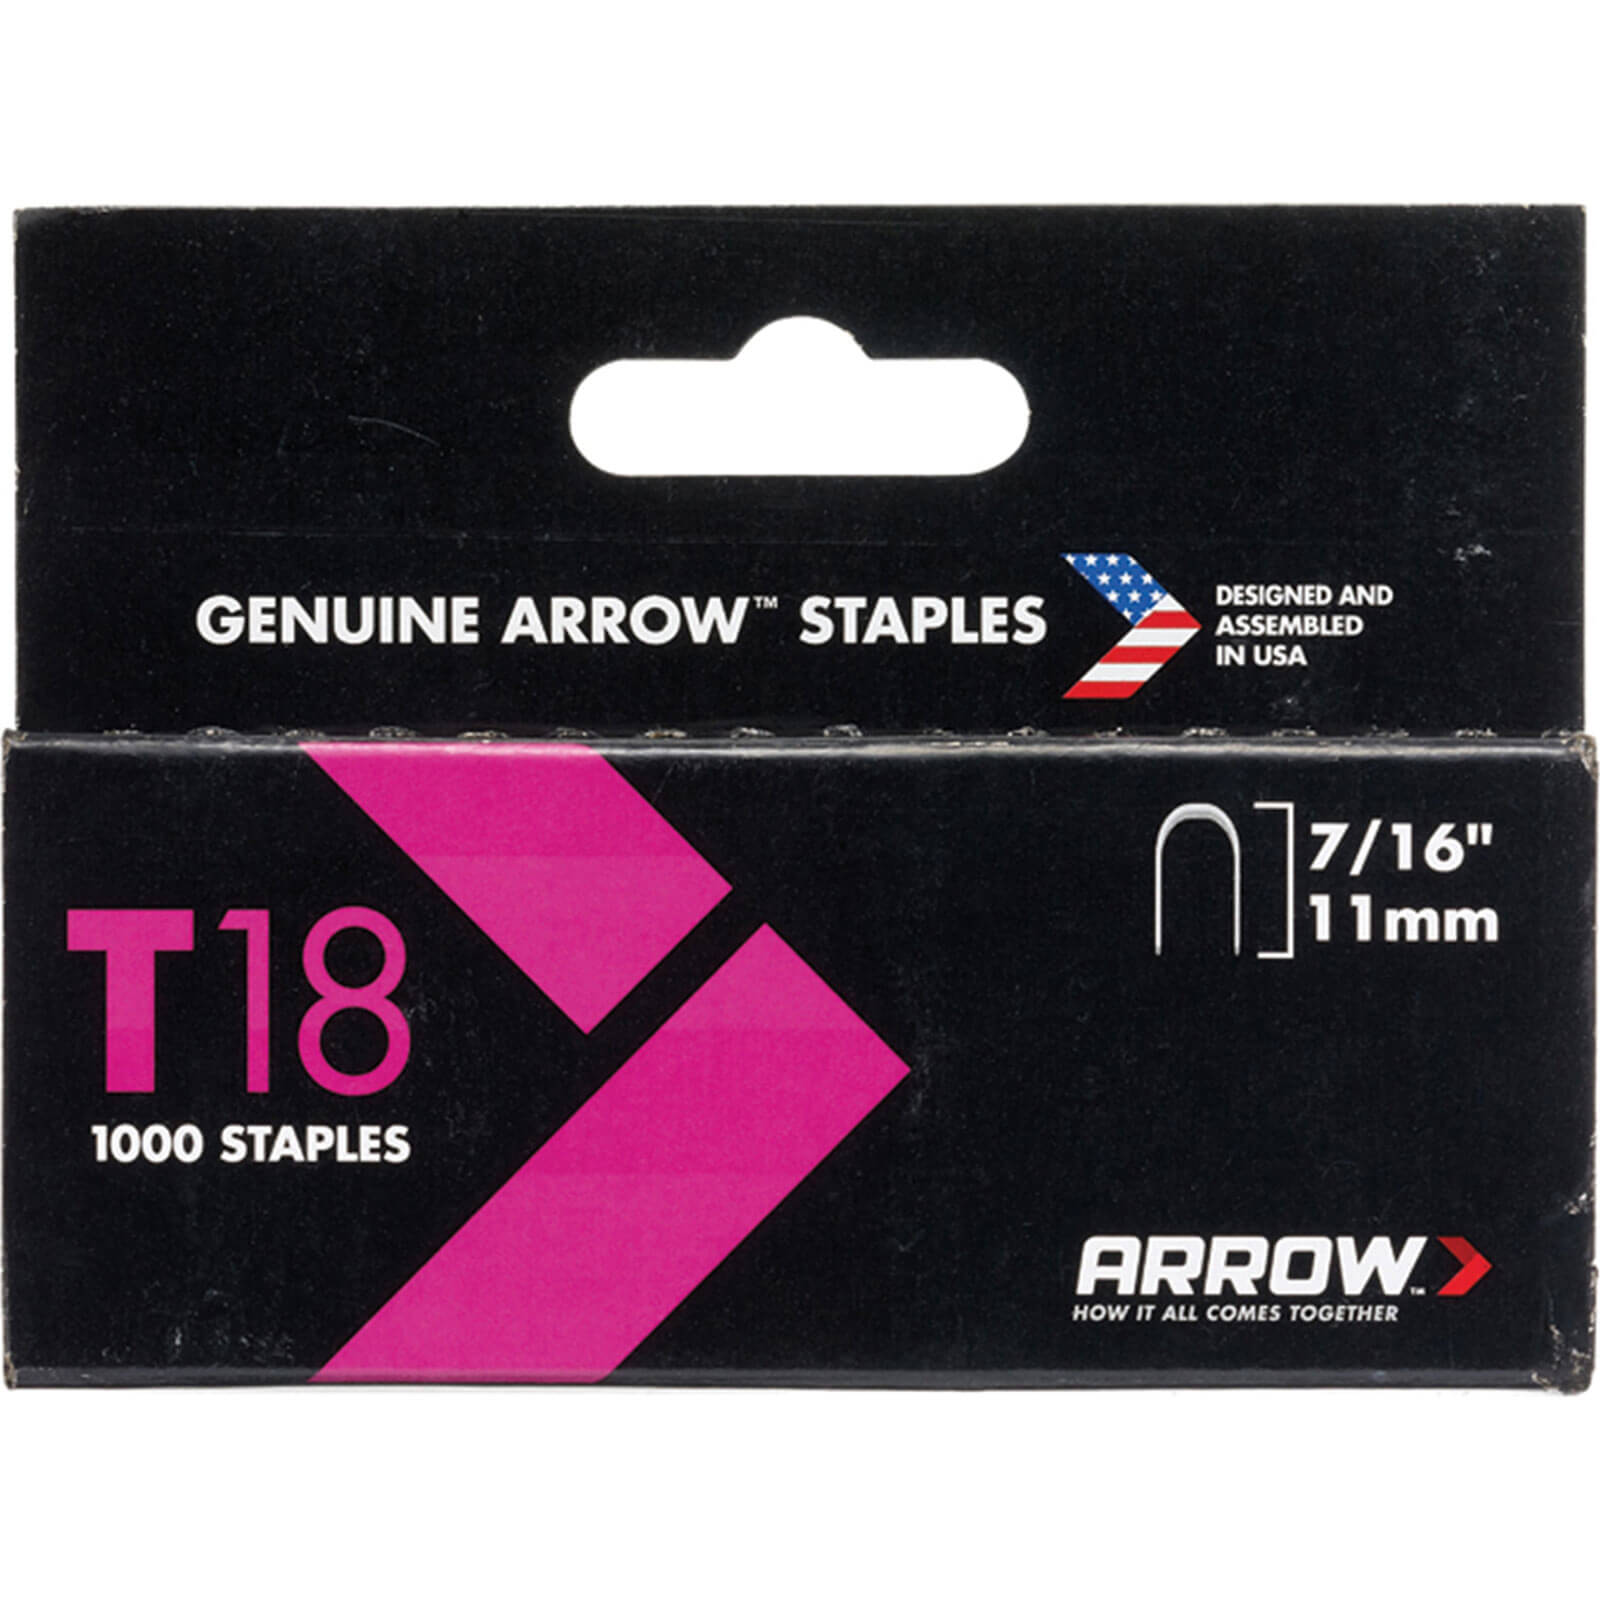 Image of Arrow T18 Wiring Staples 11mm Pack of 1000